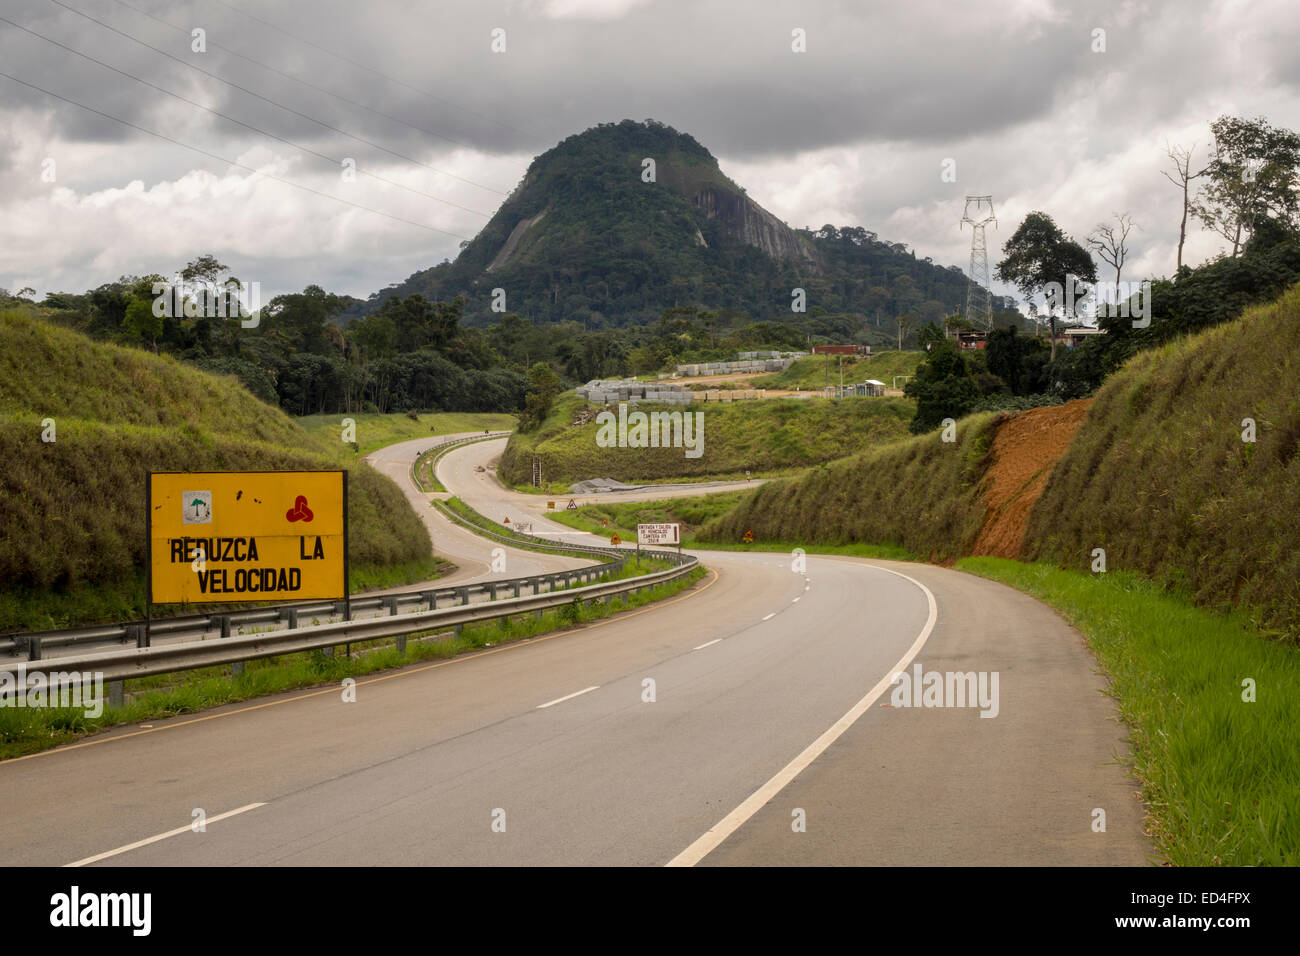 Dual carriageway modern highway past distinctive mountain on way to the new capital city of Oyala, Equatorial Guinea Stock Photo